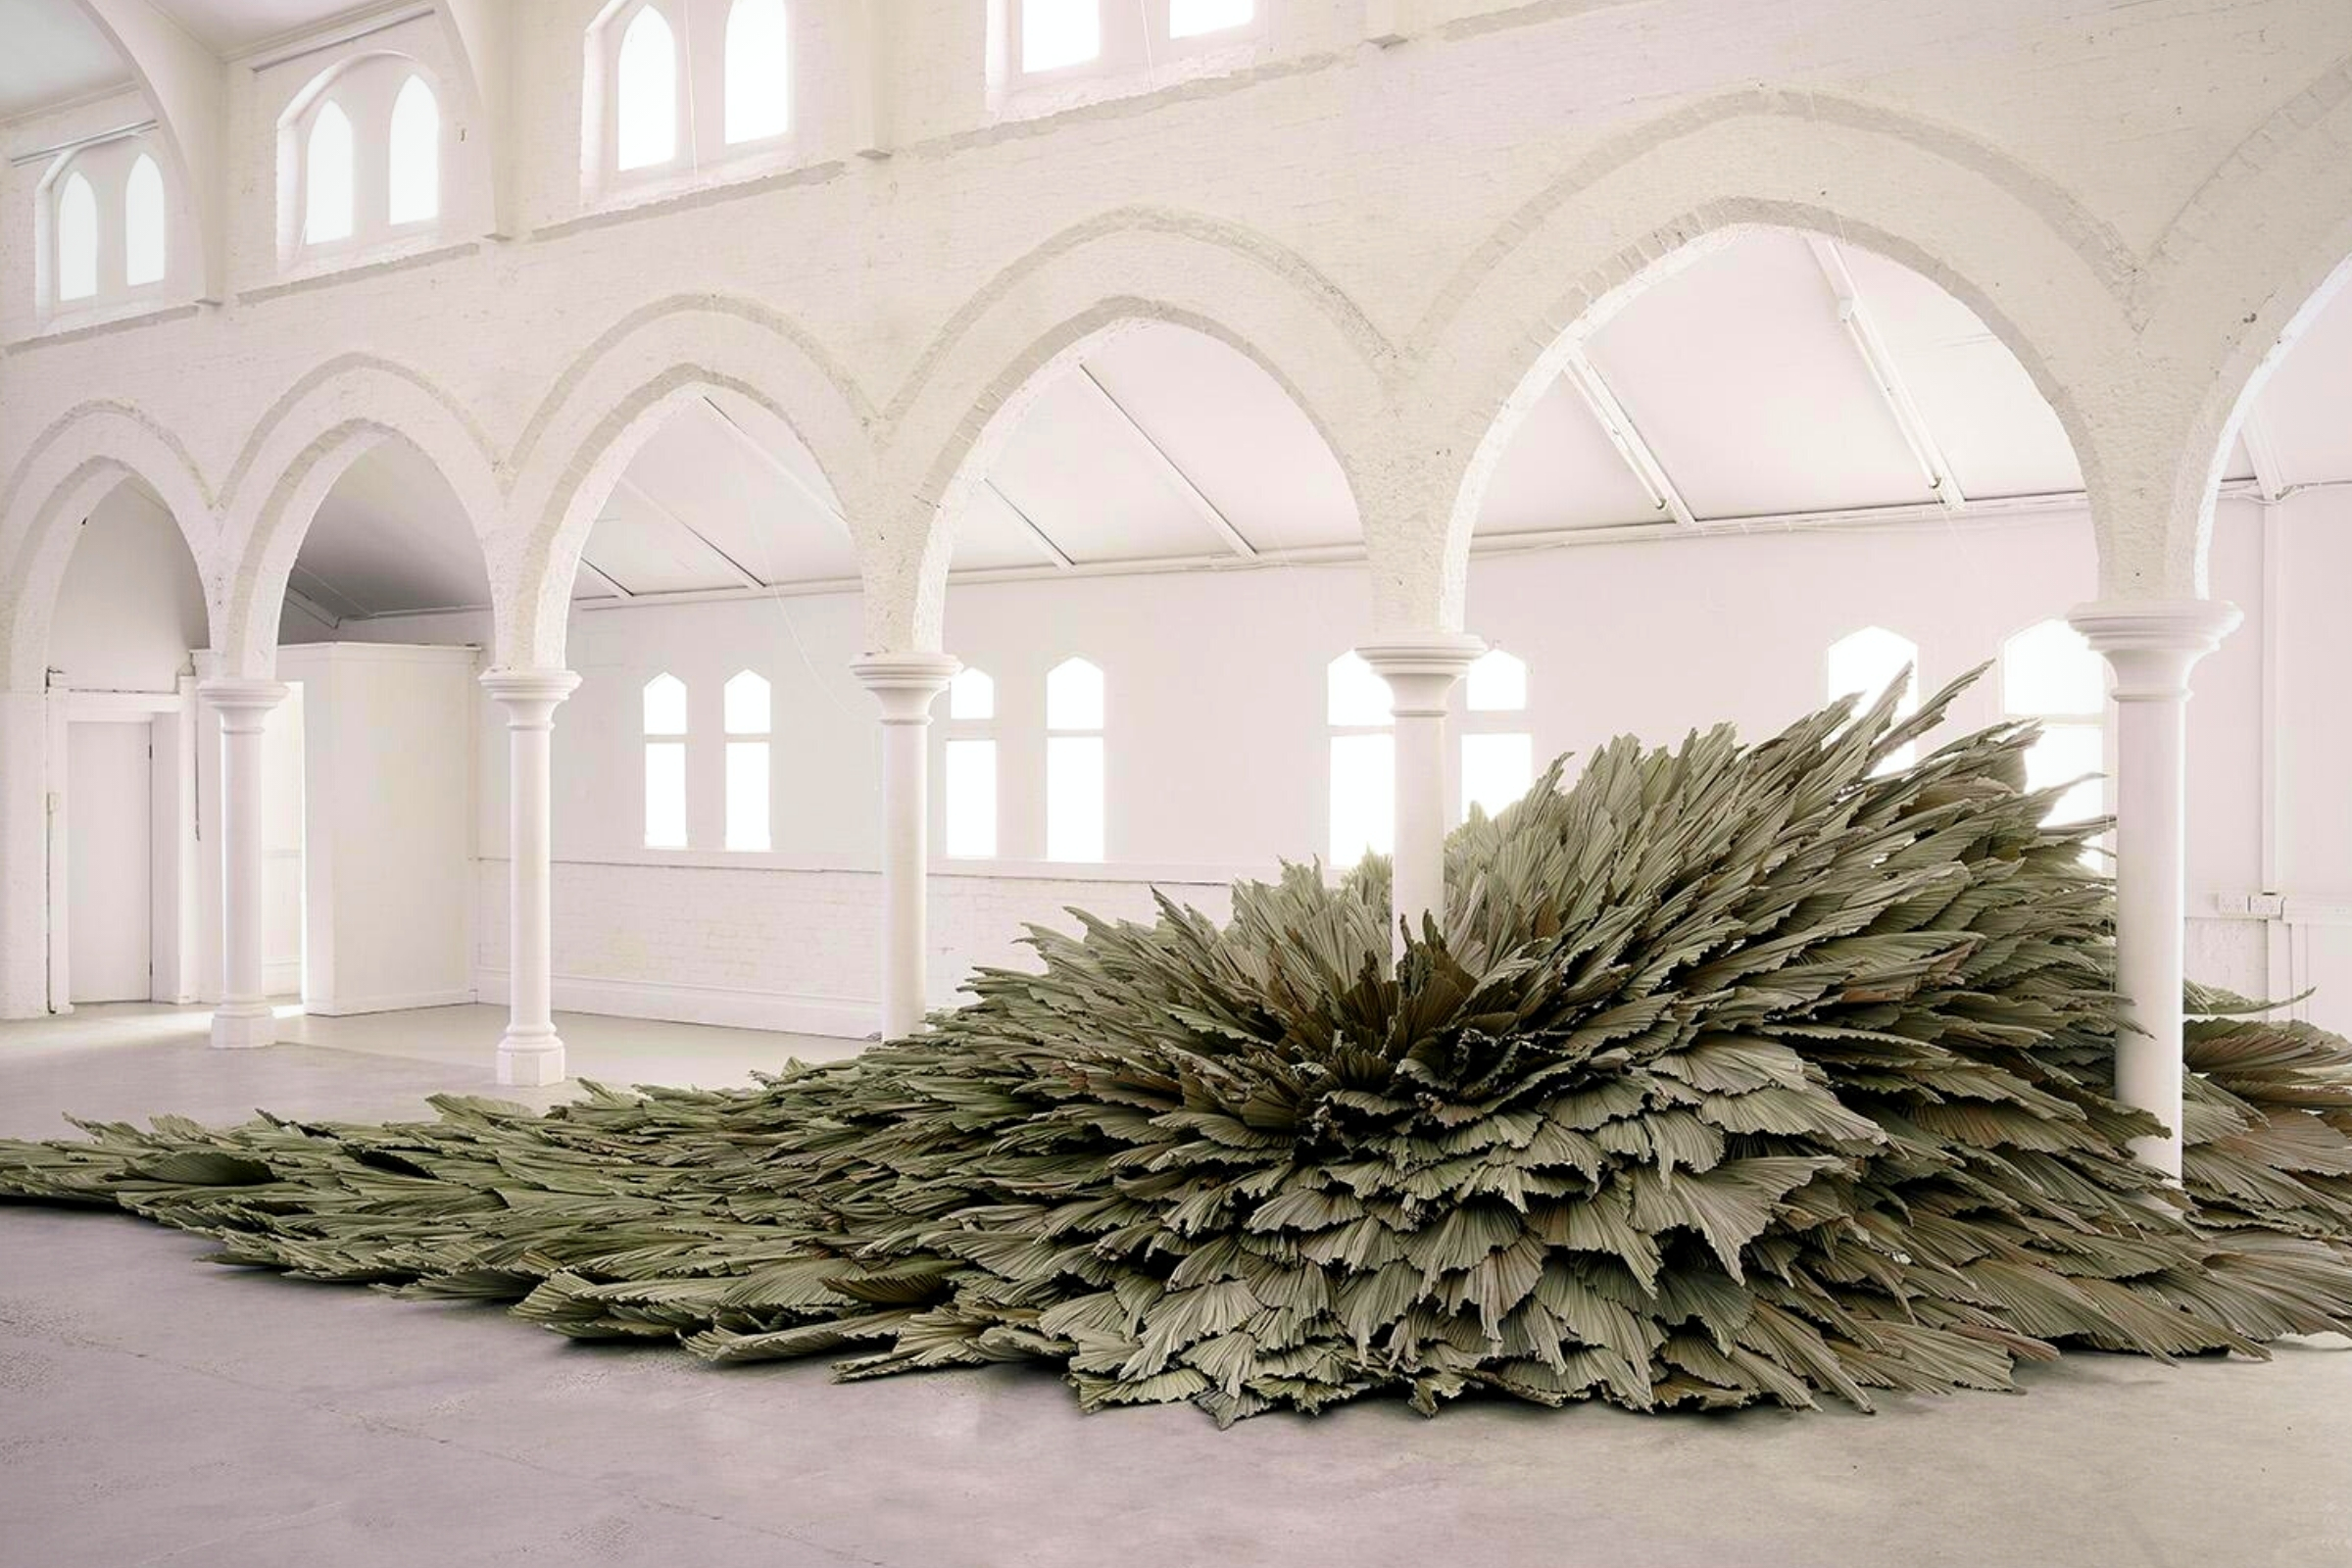 loose-leaf-a-studio-full-of-natural-materials-and-sculptural-artworks-featured